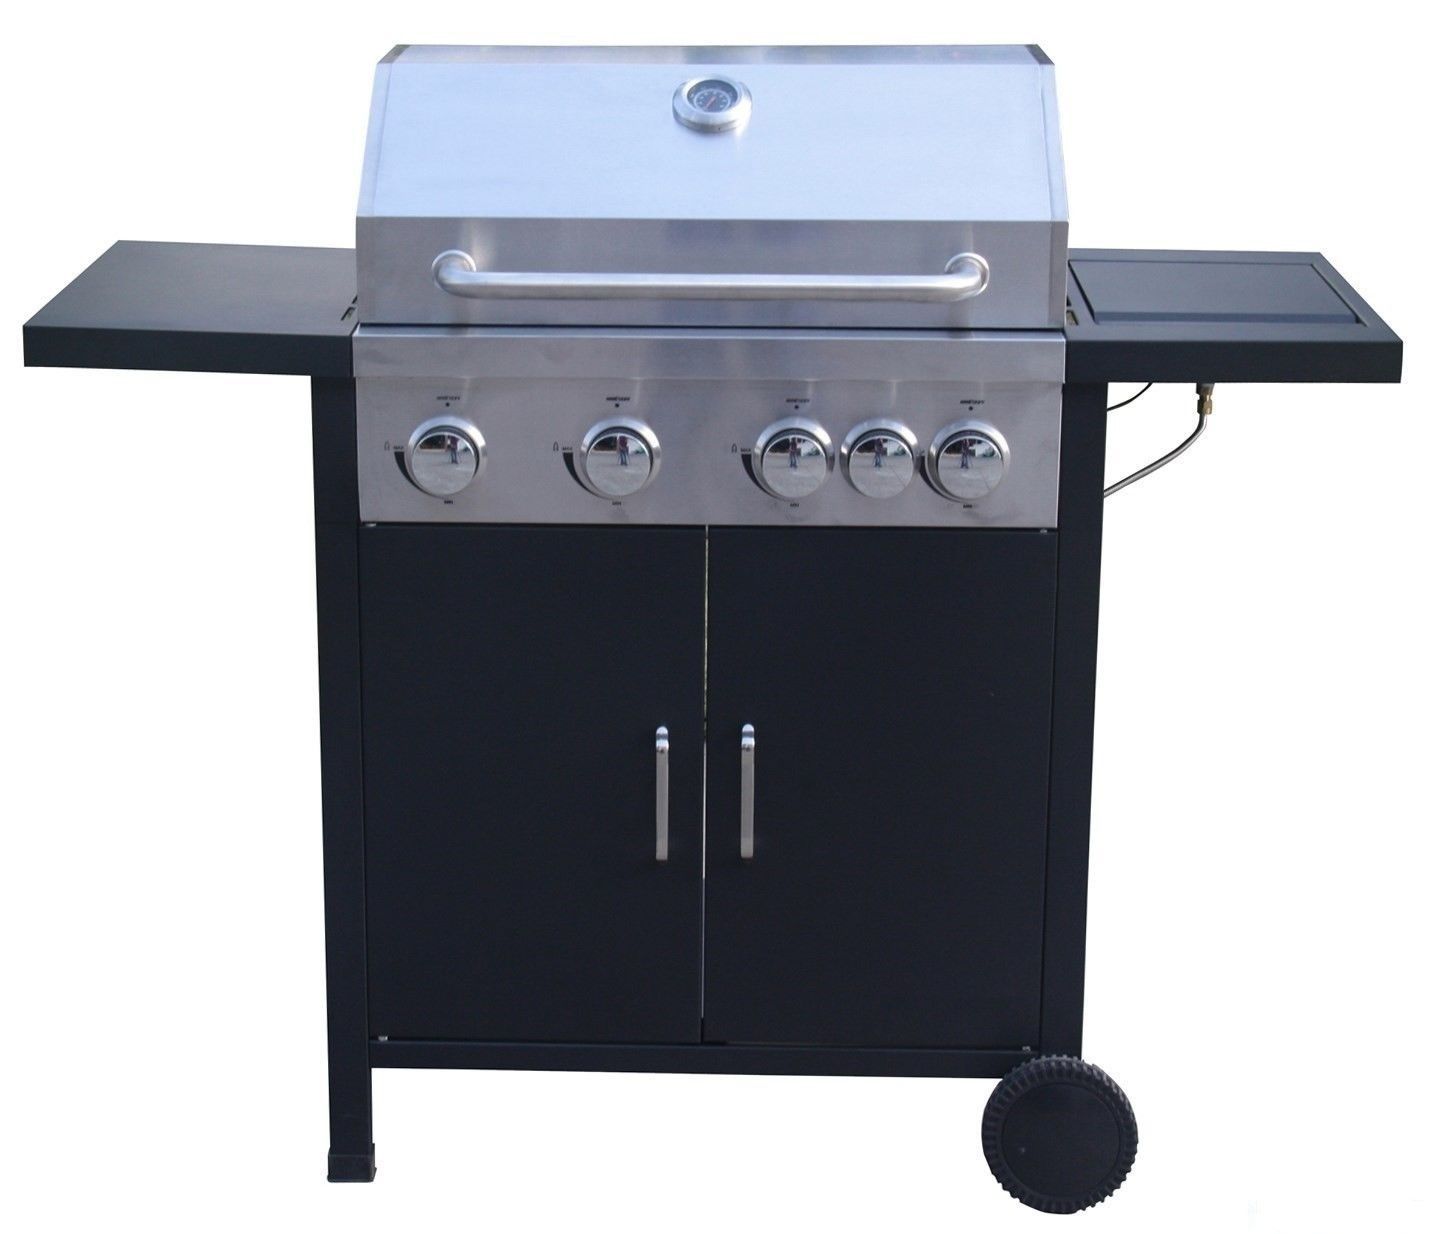 Les barbecues les plus chers : quelques folies MADE IN USA